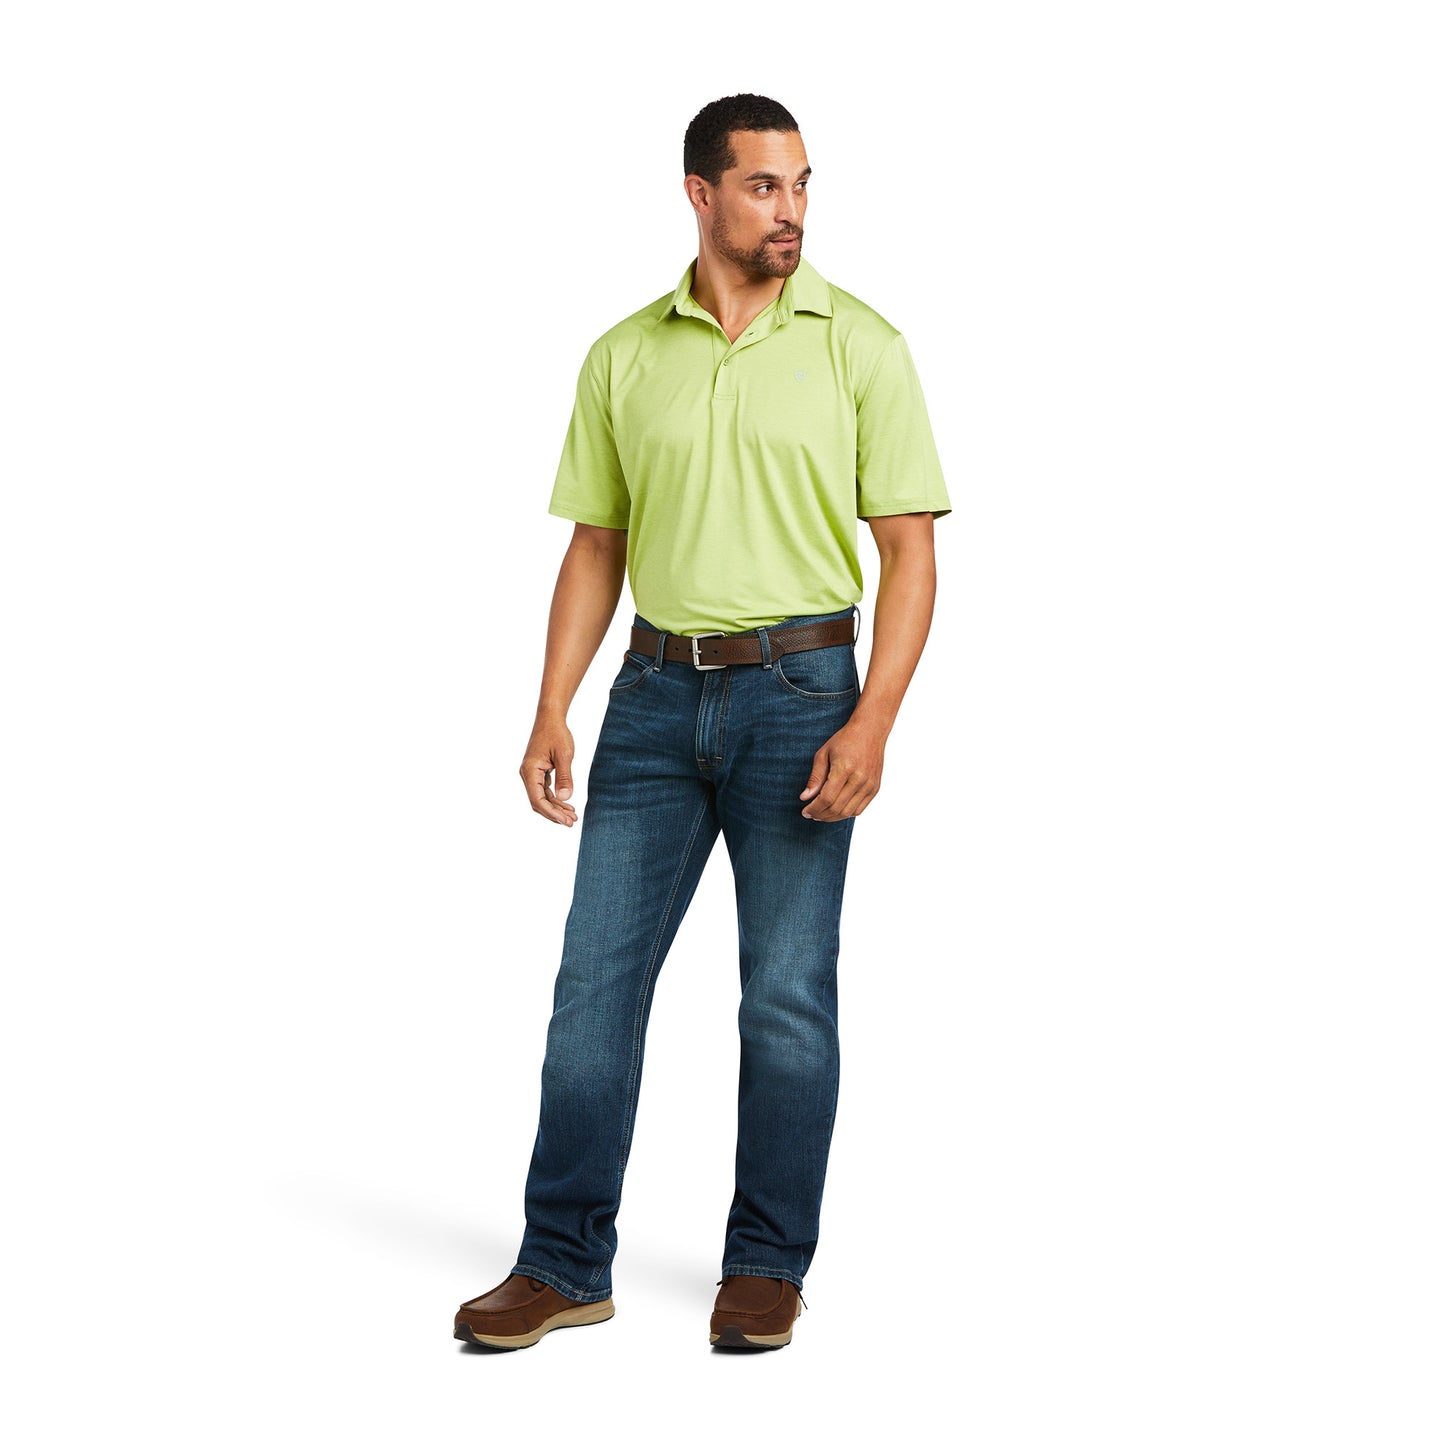 Ariat® Men's Charger 2.0 Lime Chaser Short Sleeve Polo Shirt 10039415